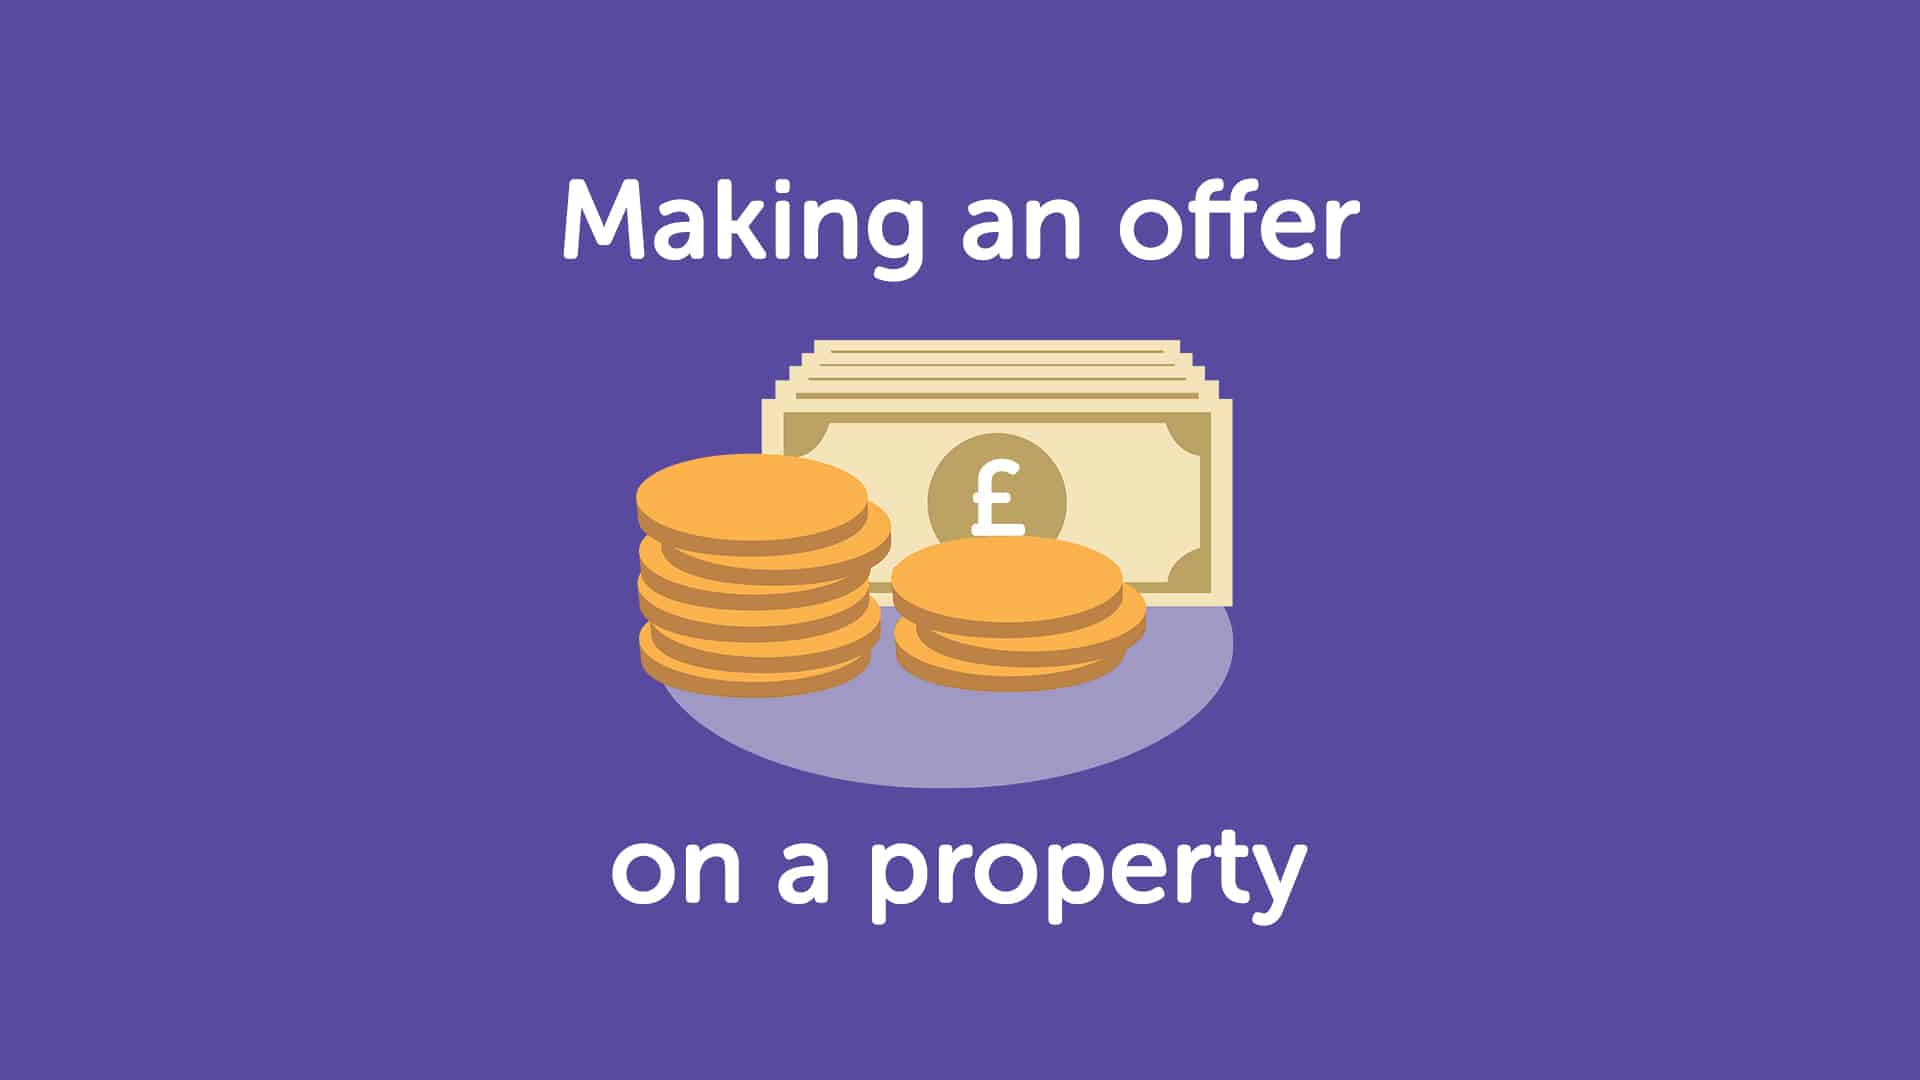 How To Make An Offer On A Property In Coventry?